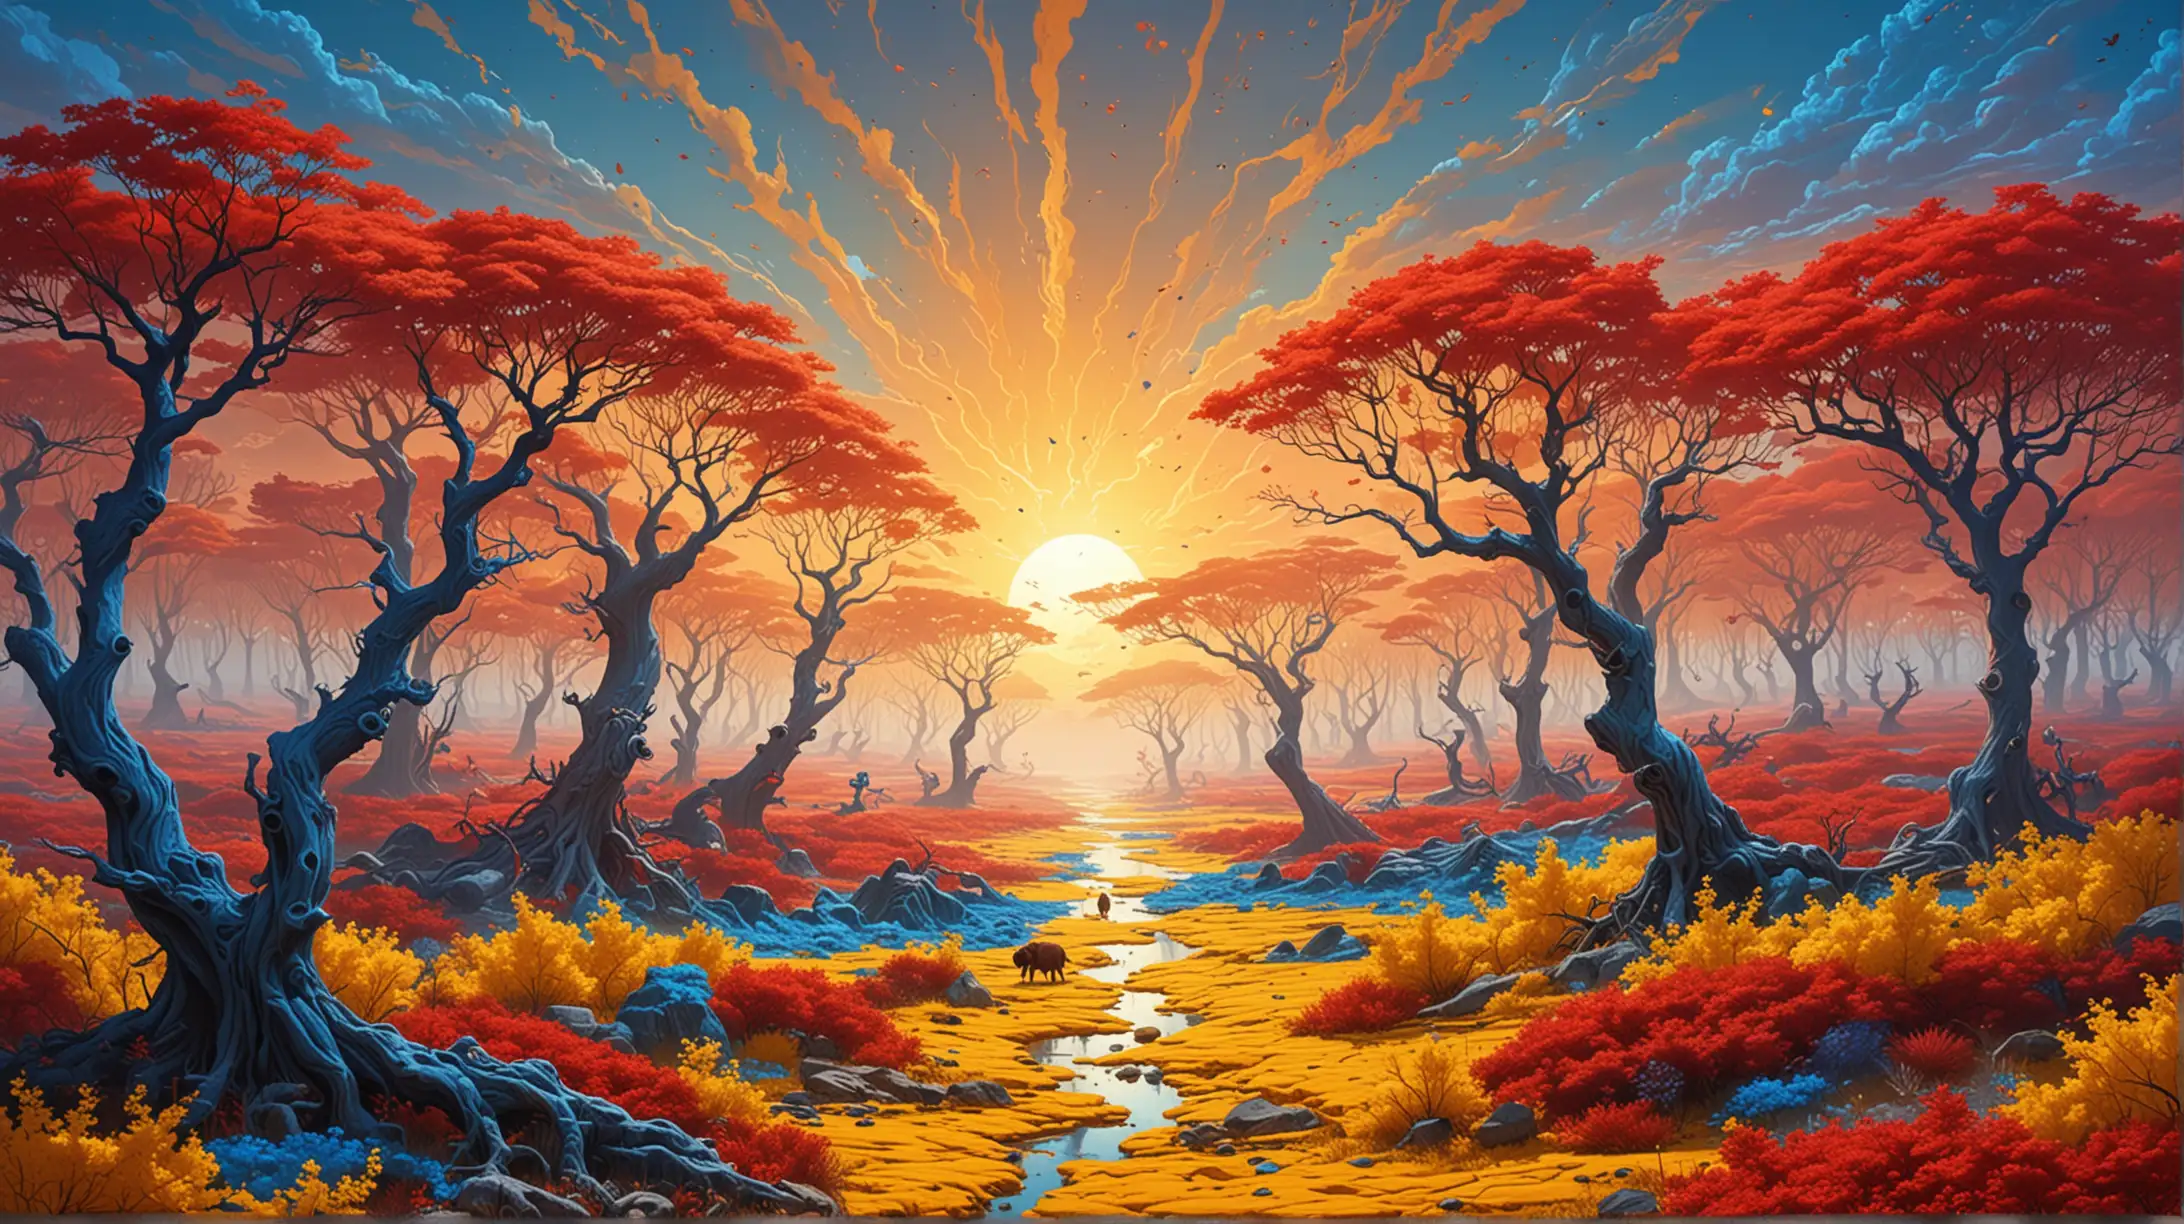 the landscape of another world, yellow ocean, blue and red trees, strange colorful animals